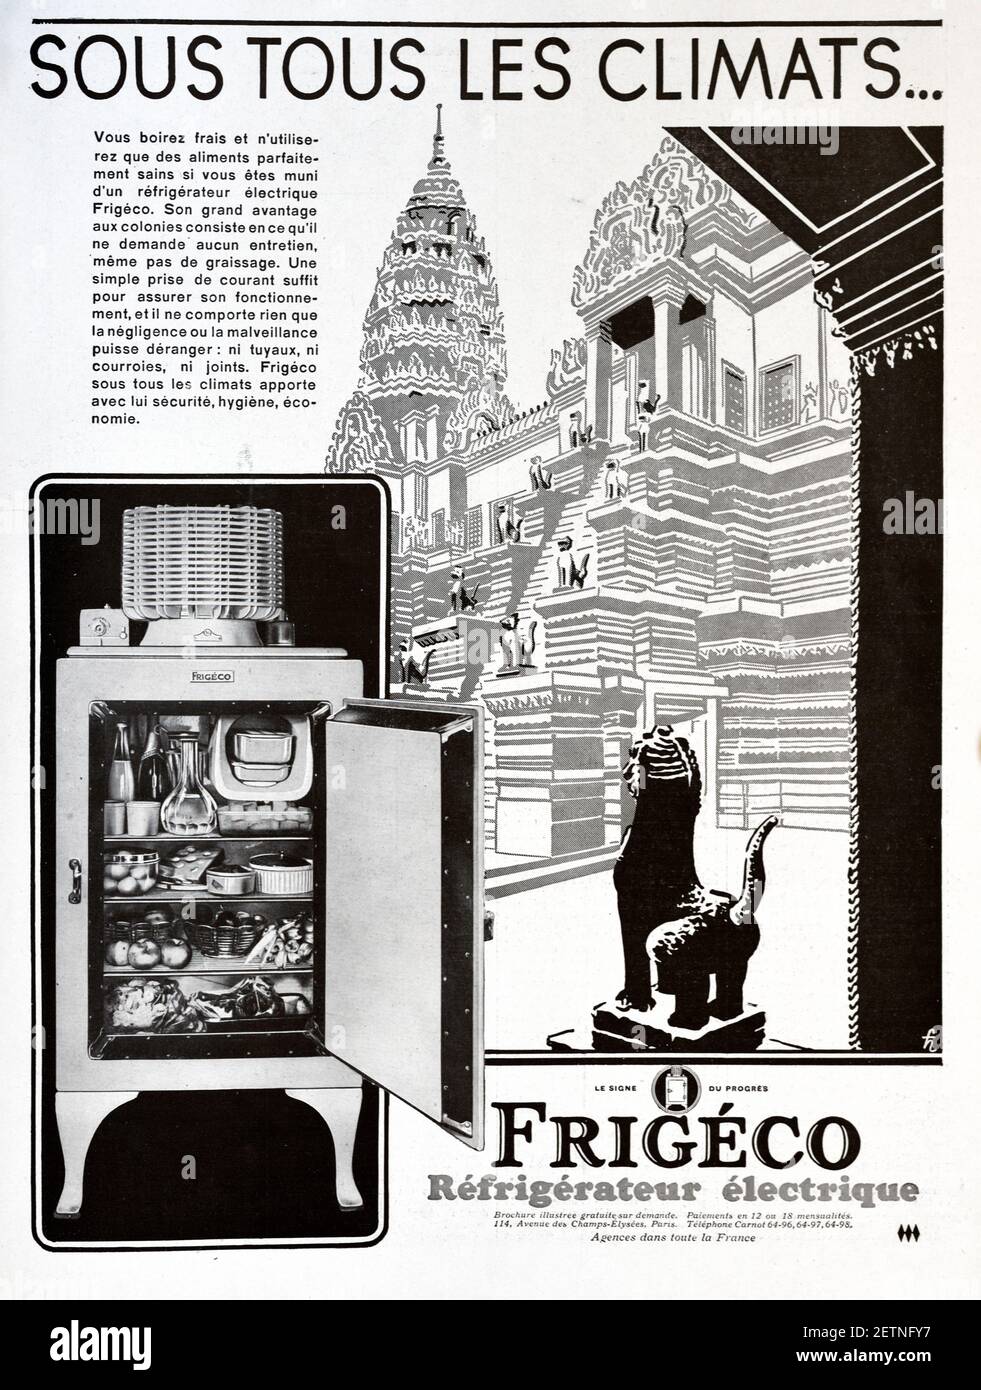 Vintage Advert, Advertisement or Publicity for Early Frigéco Electric Refrigerator or Fridge among Ruins of Angkor Wat Temples or Temple Ruins Cambodia 1931 Stock Photo